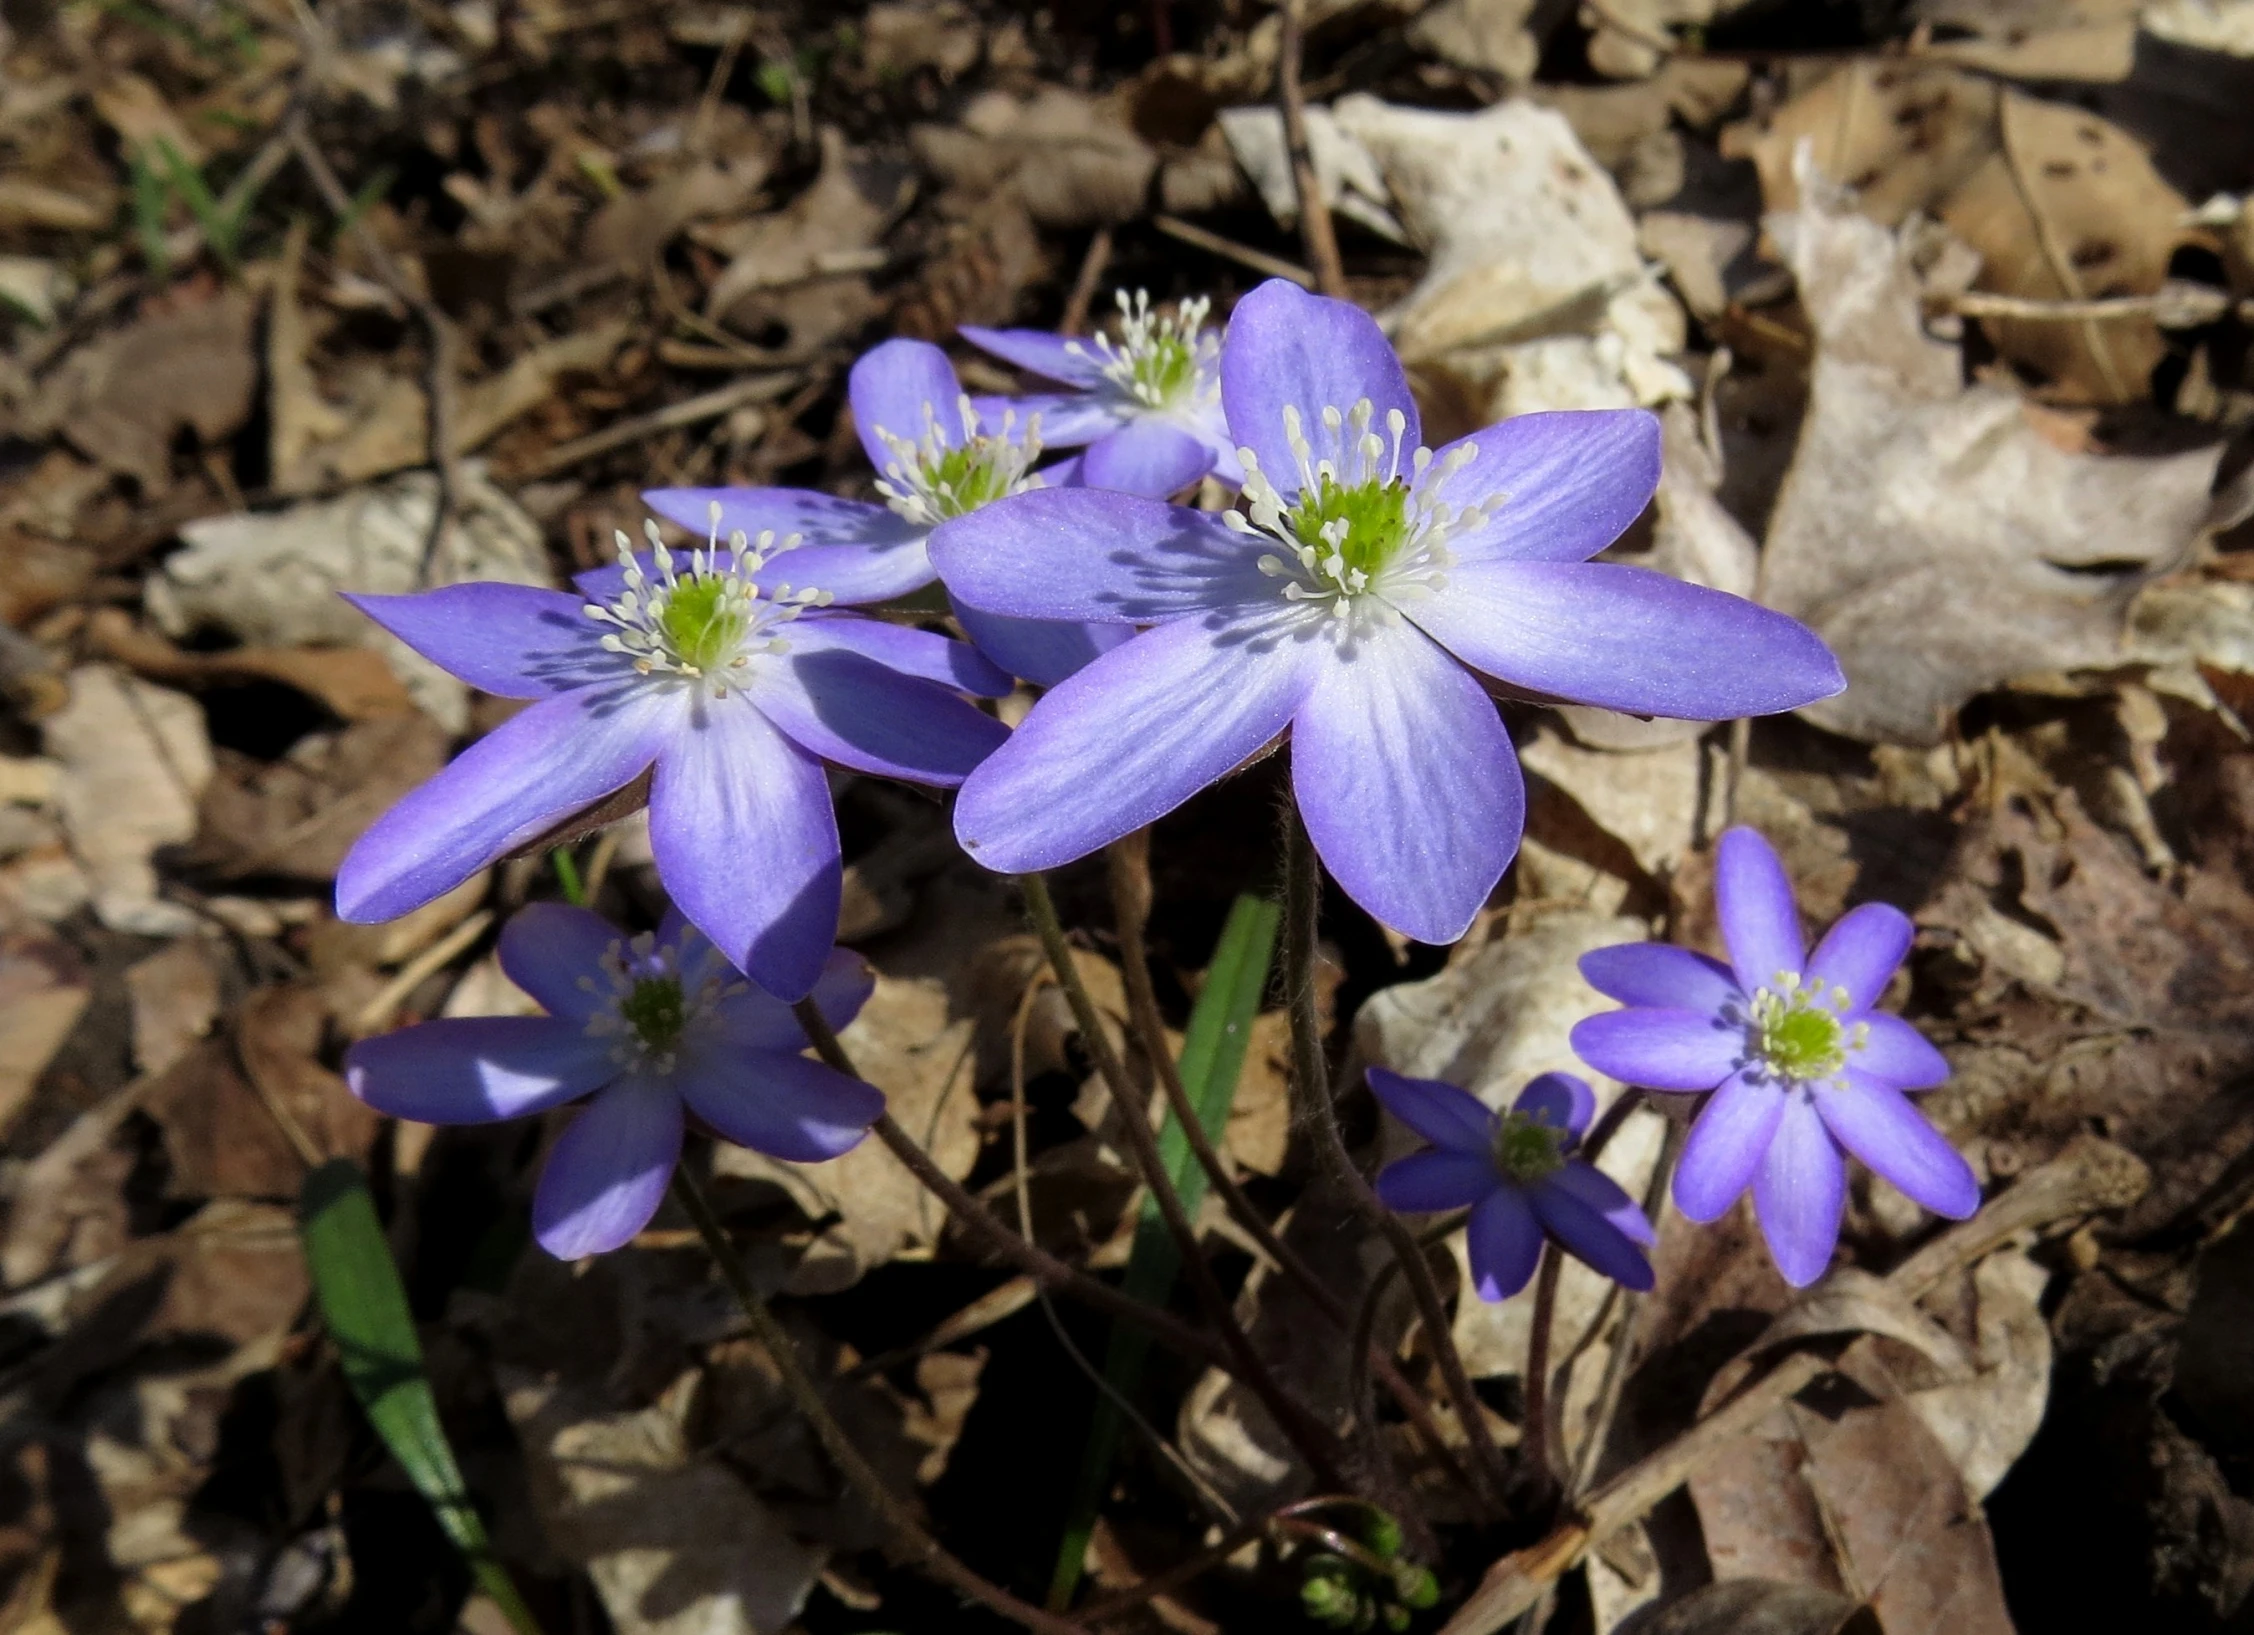 several purple flowers blooming in the sun in the fall